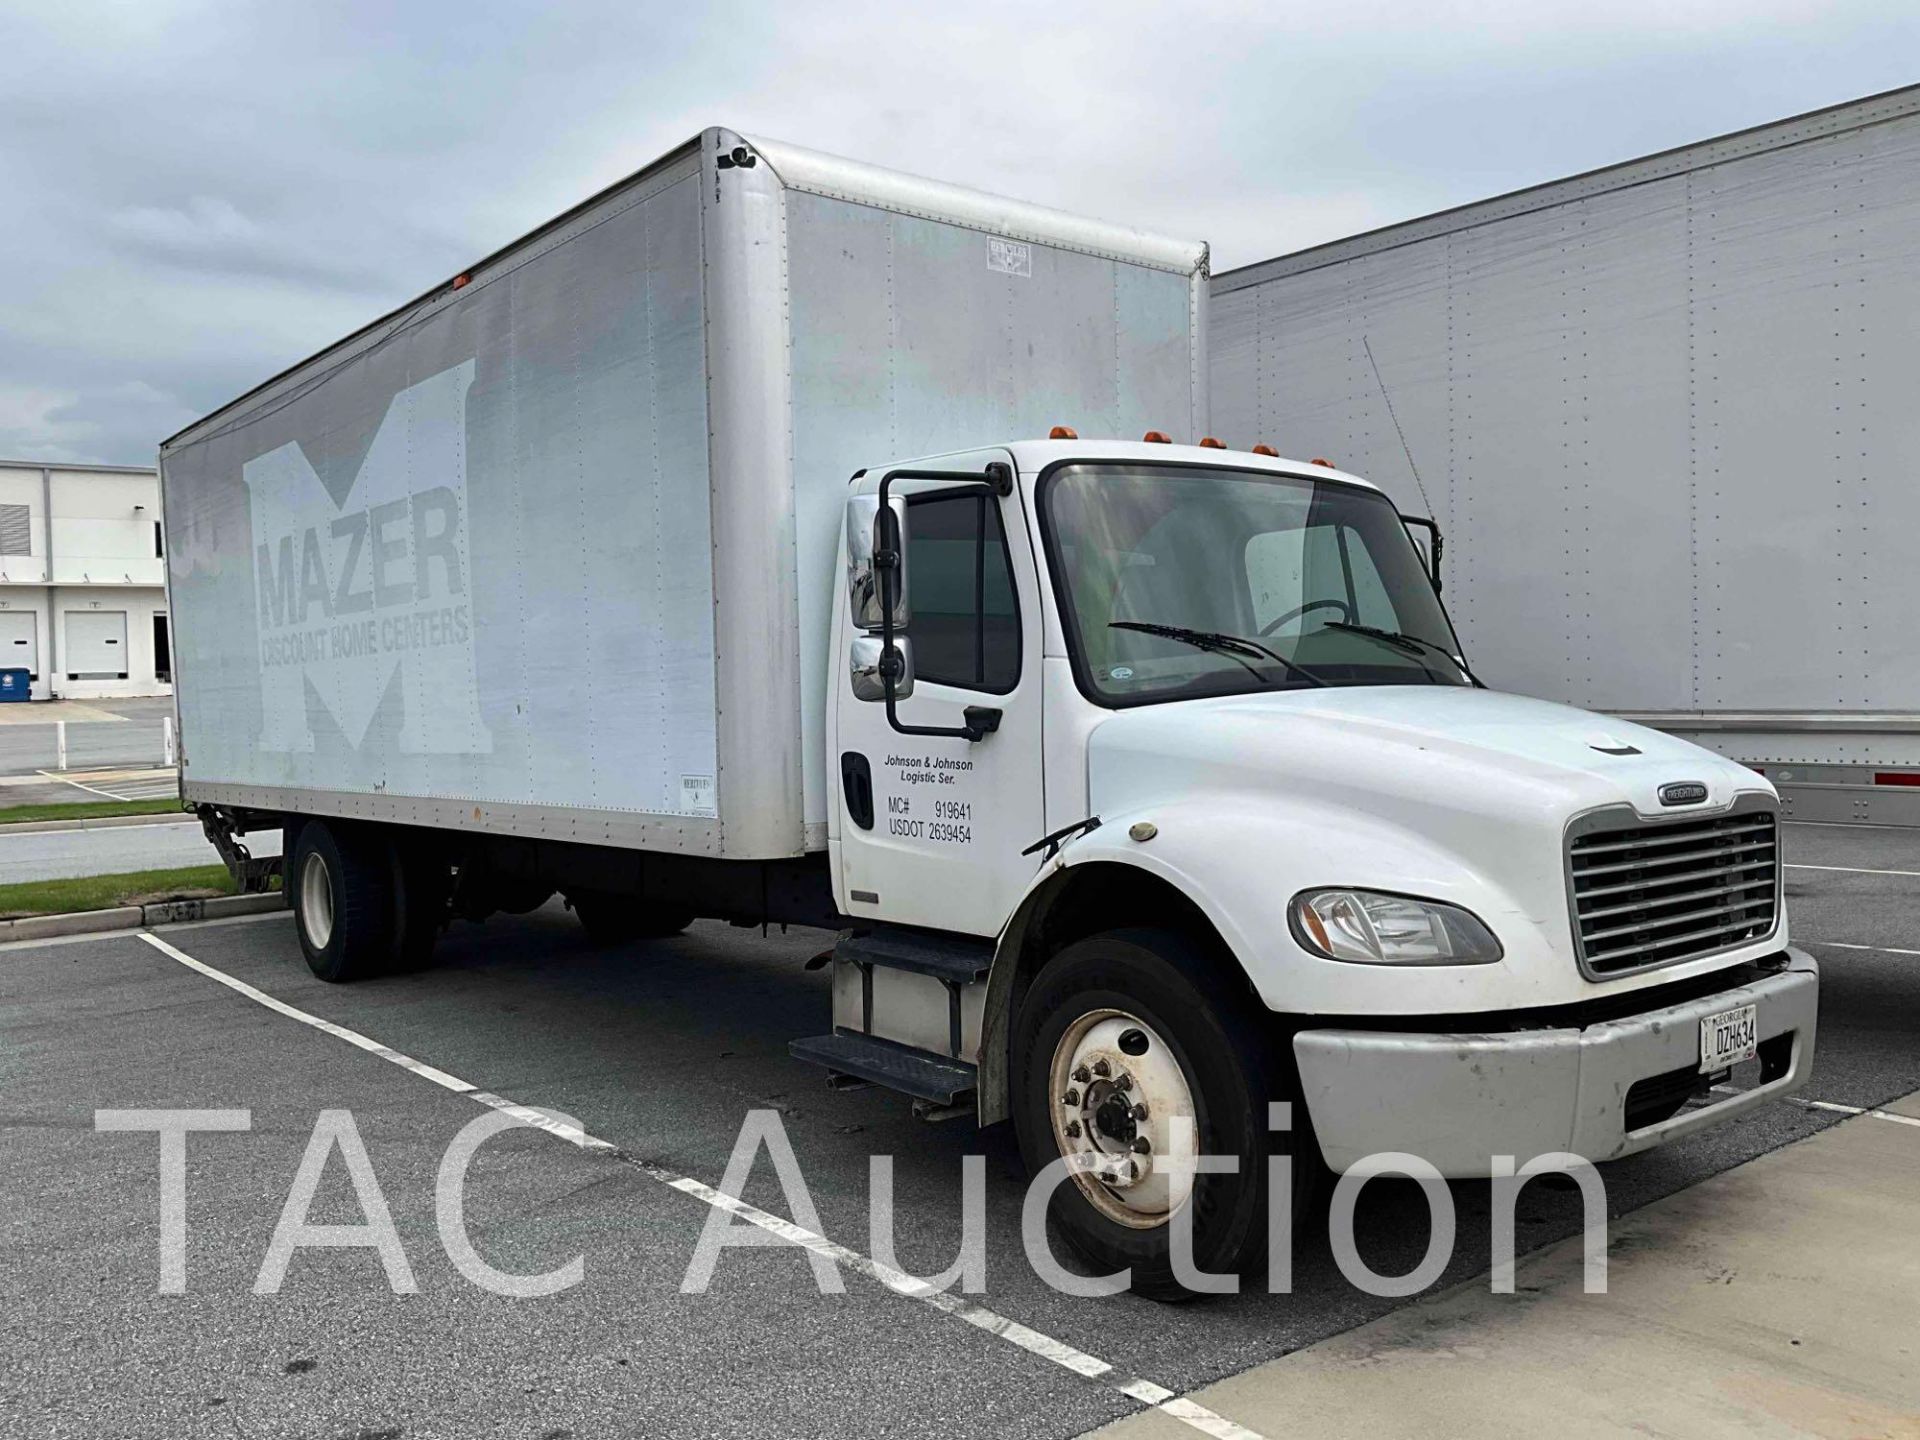 2008 Freightliner M2 Business Class 26ft Box Truck - Image 3 of 75